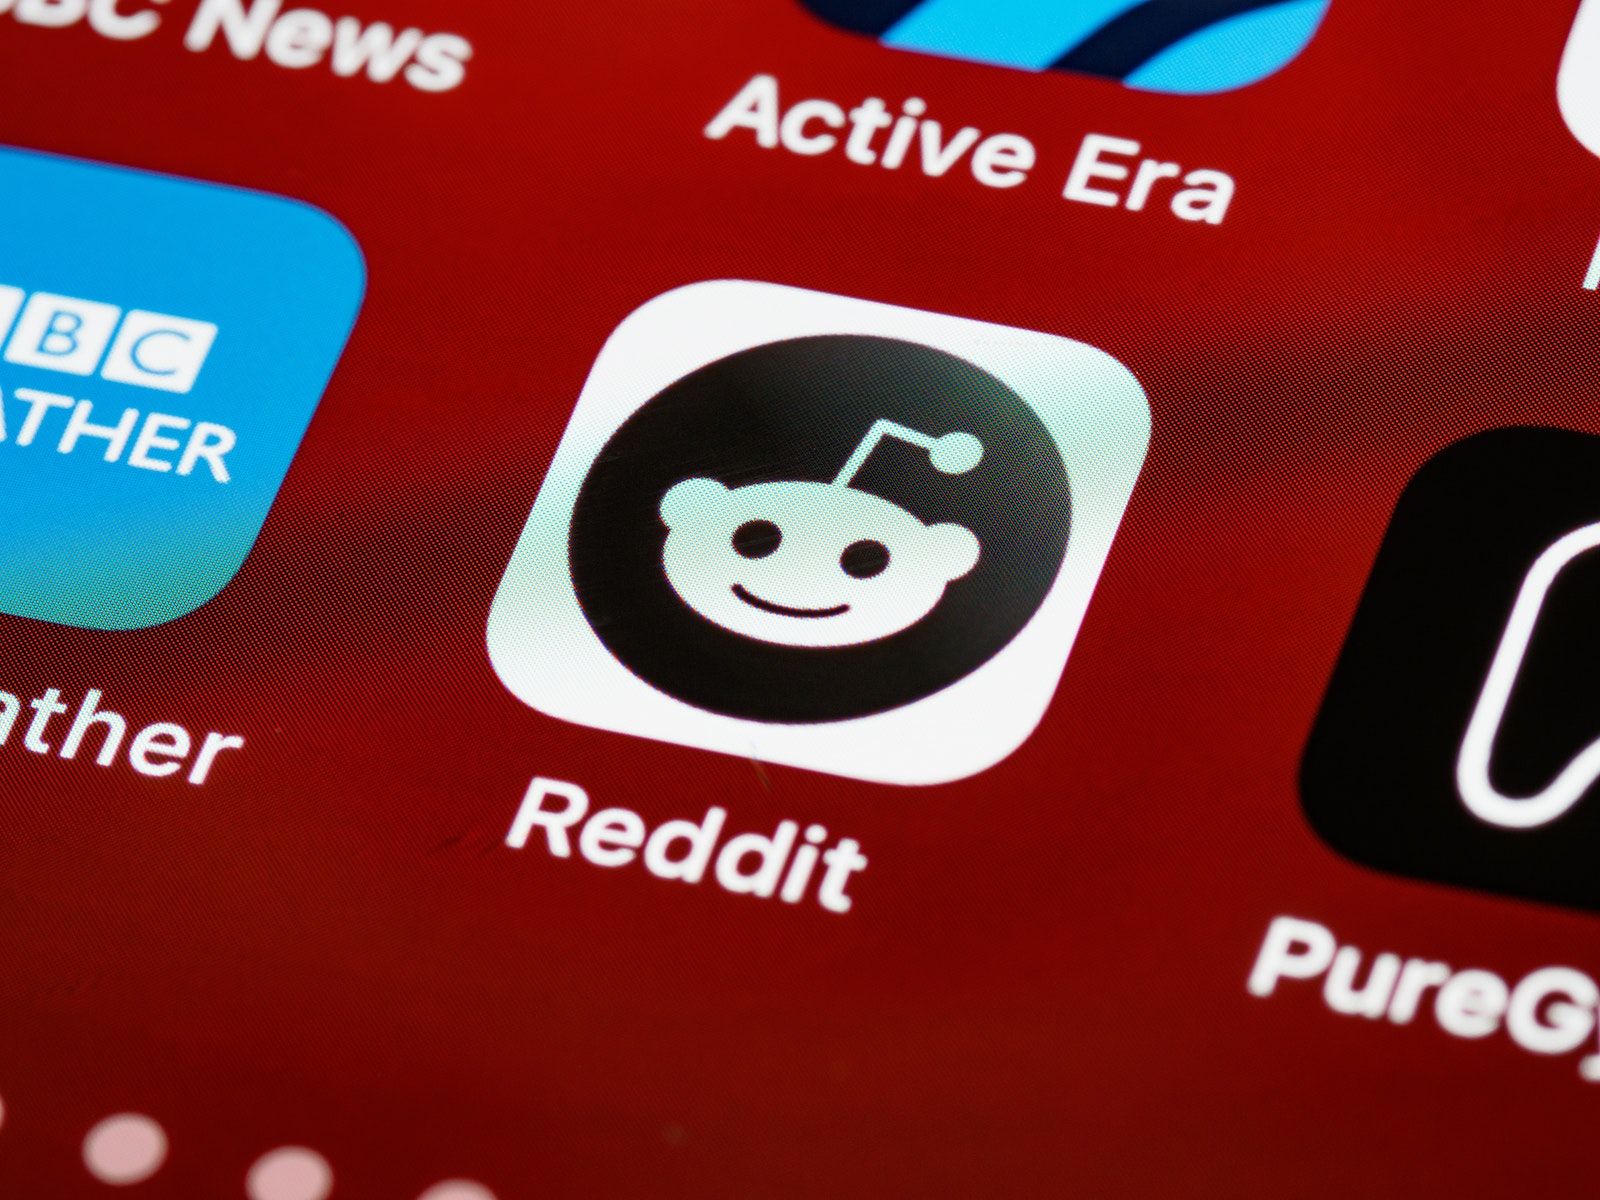 Reddit: The Ultimate Guide to Engaging Communities and Staying Informed